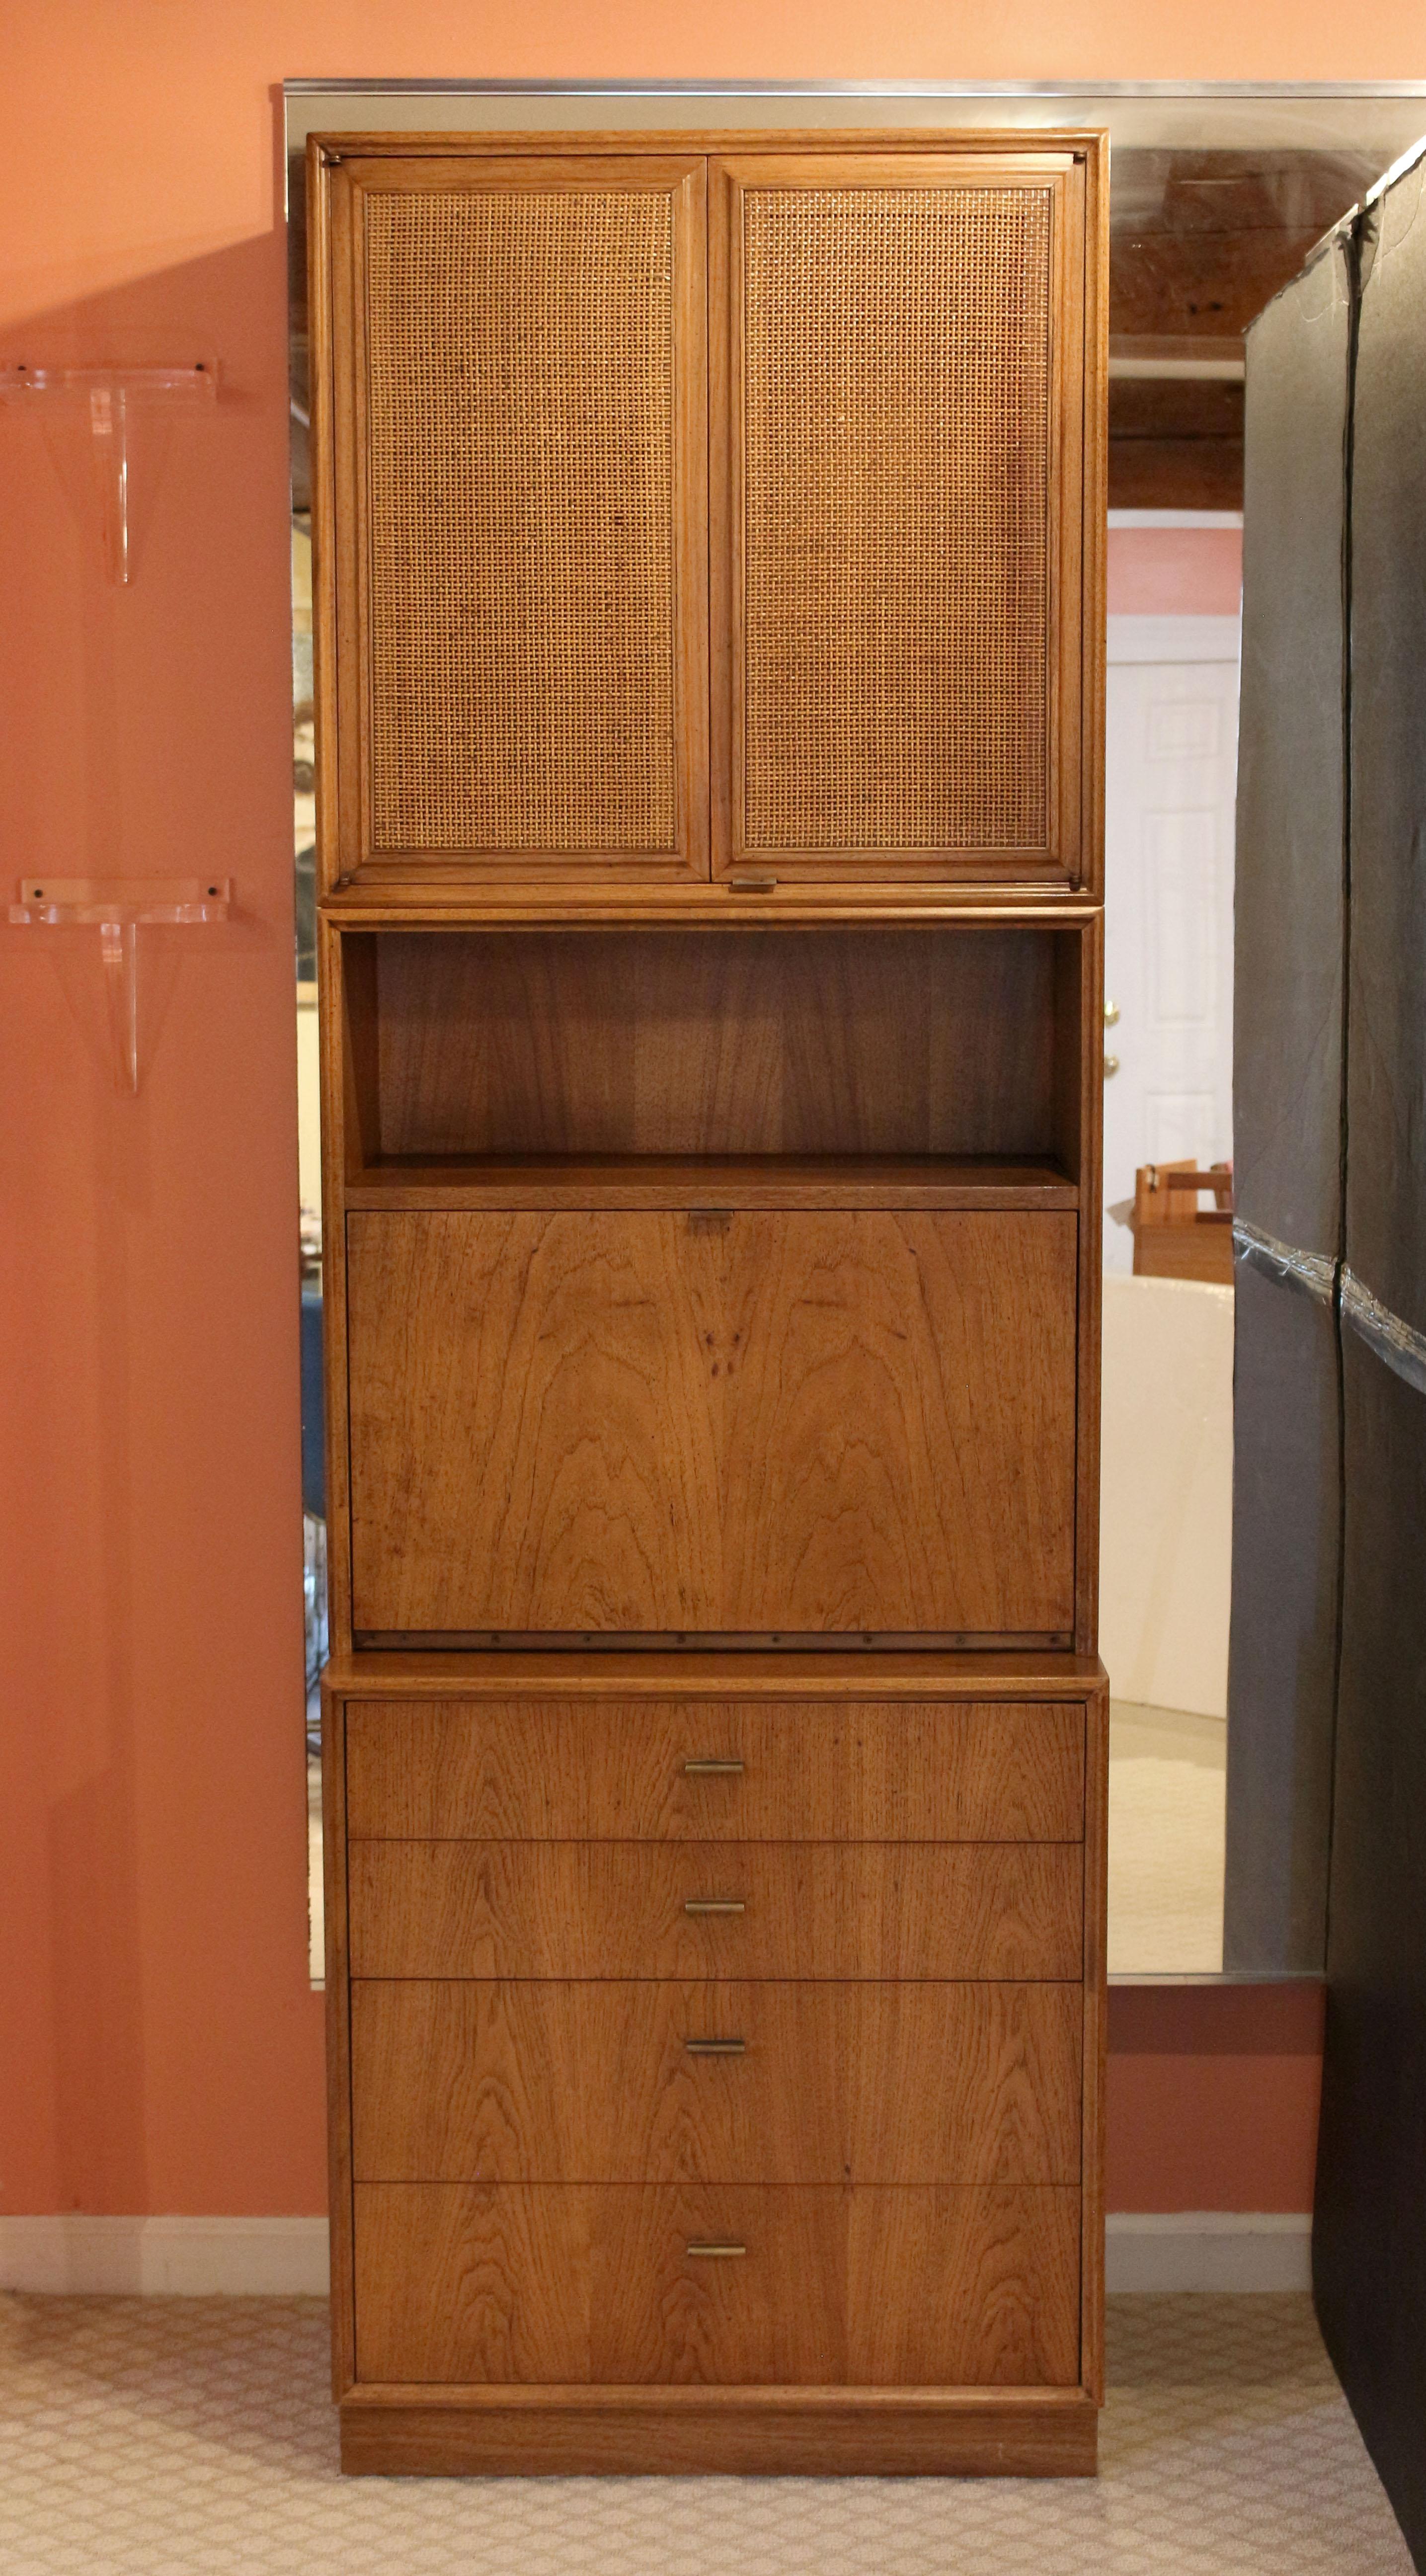 A significant quality 1960's mid-century modern three part Founders in solid pecan. Designed by Jack Cartwright. The cabinet with woven cane panels rests on a display/bookcase section with drop-front writing or bar surface. Below are four drawers